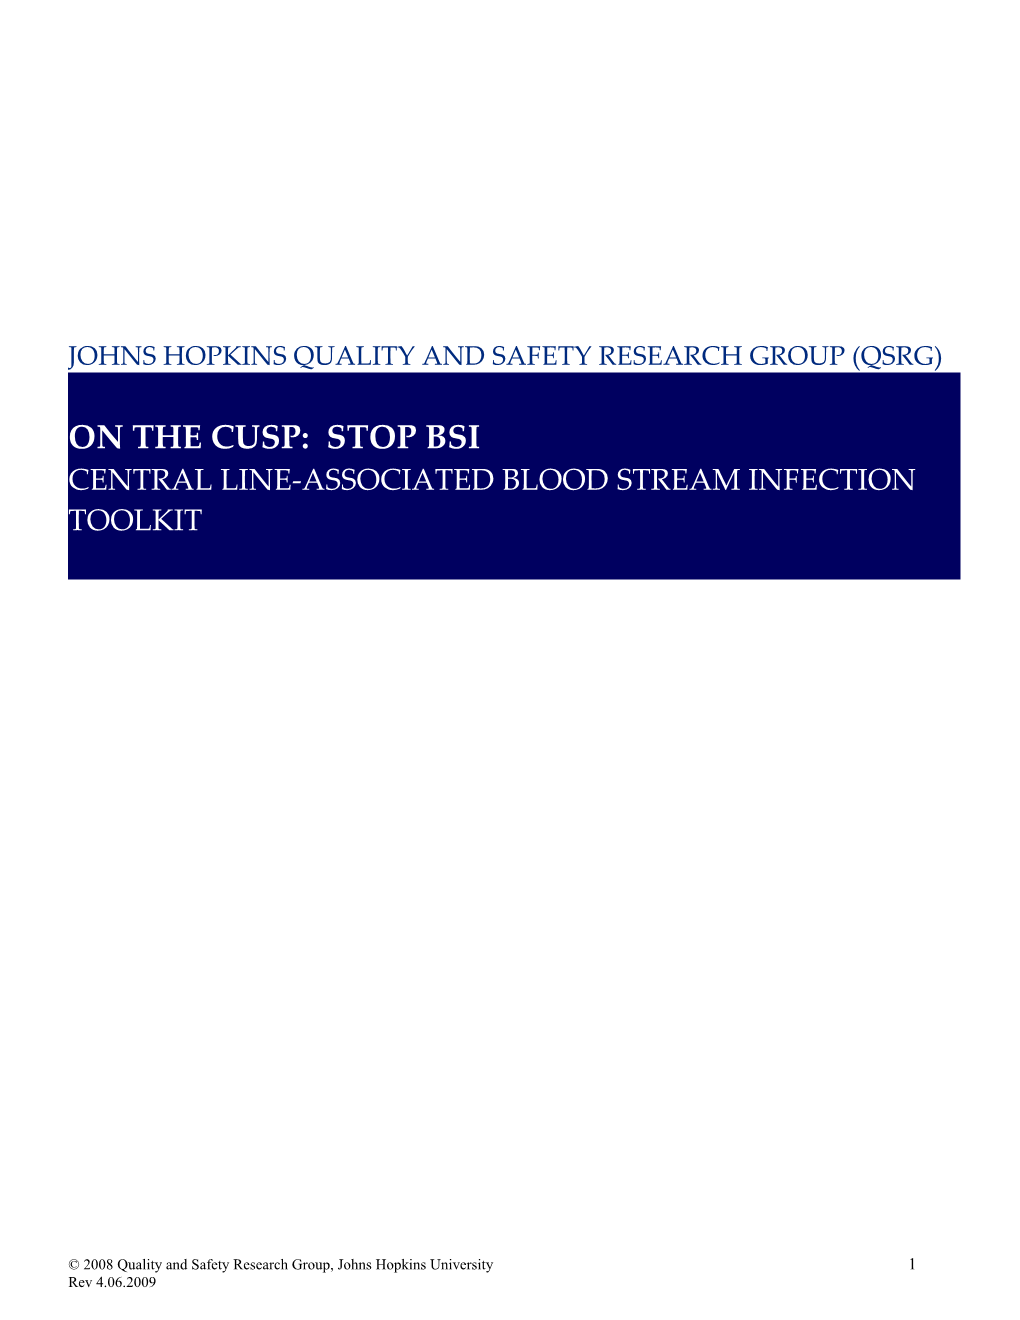 Cather-Related Blood Stream Infection Toolkit